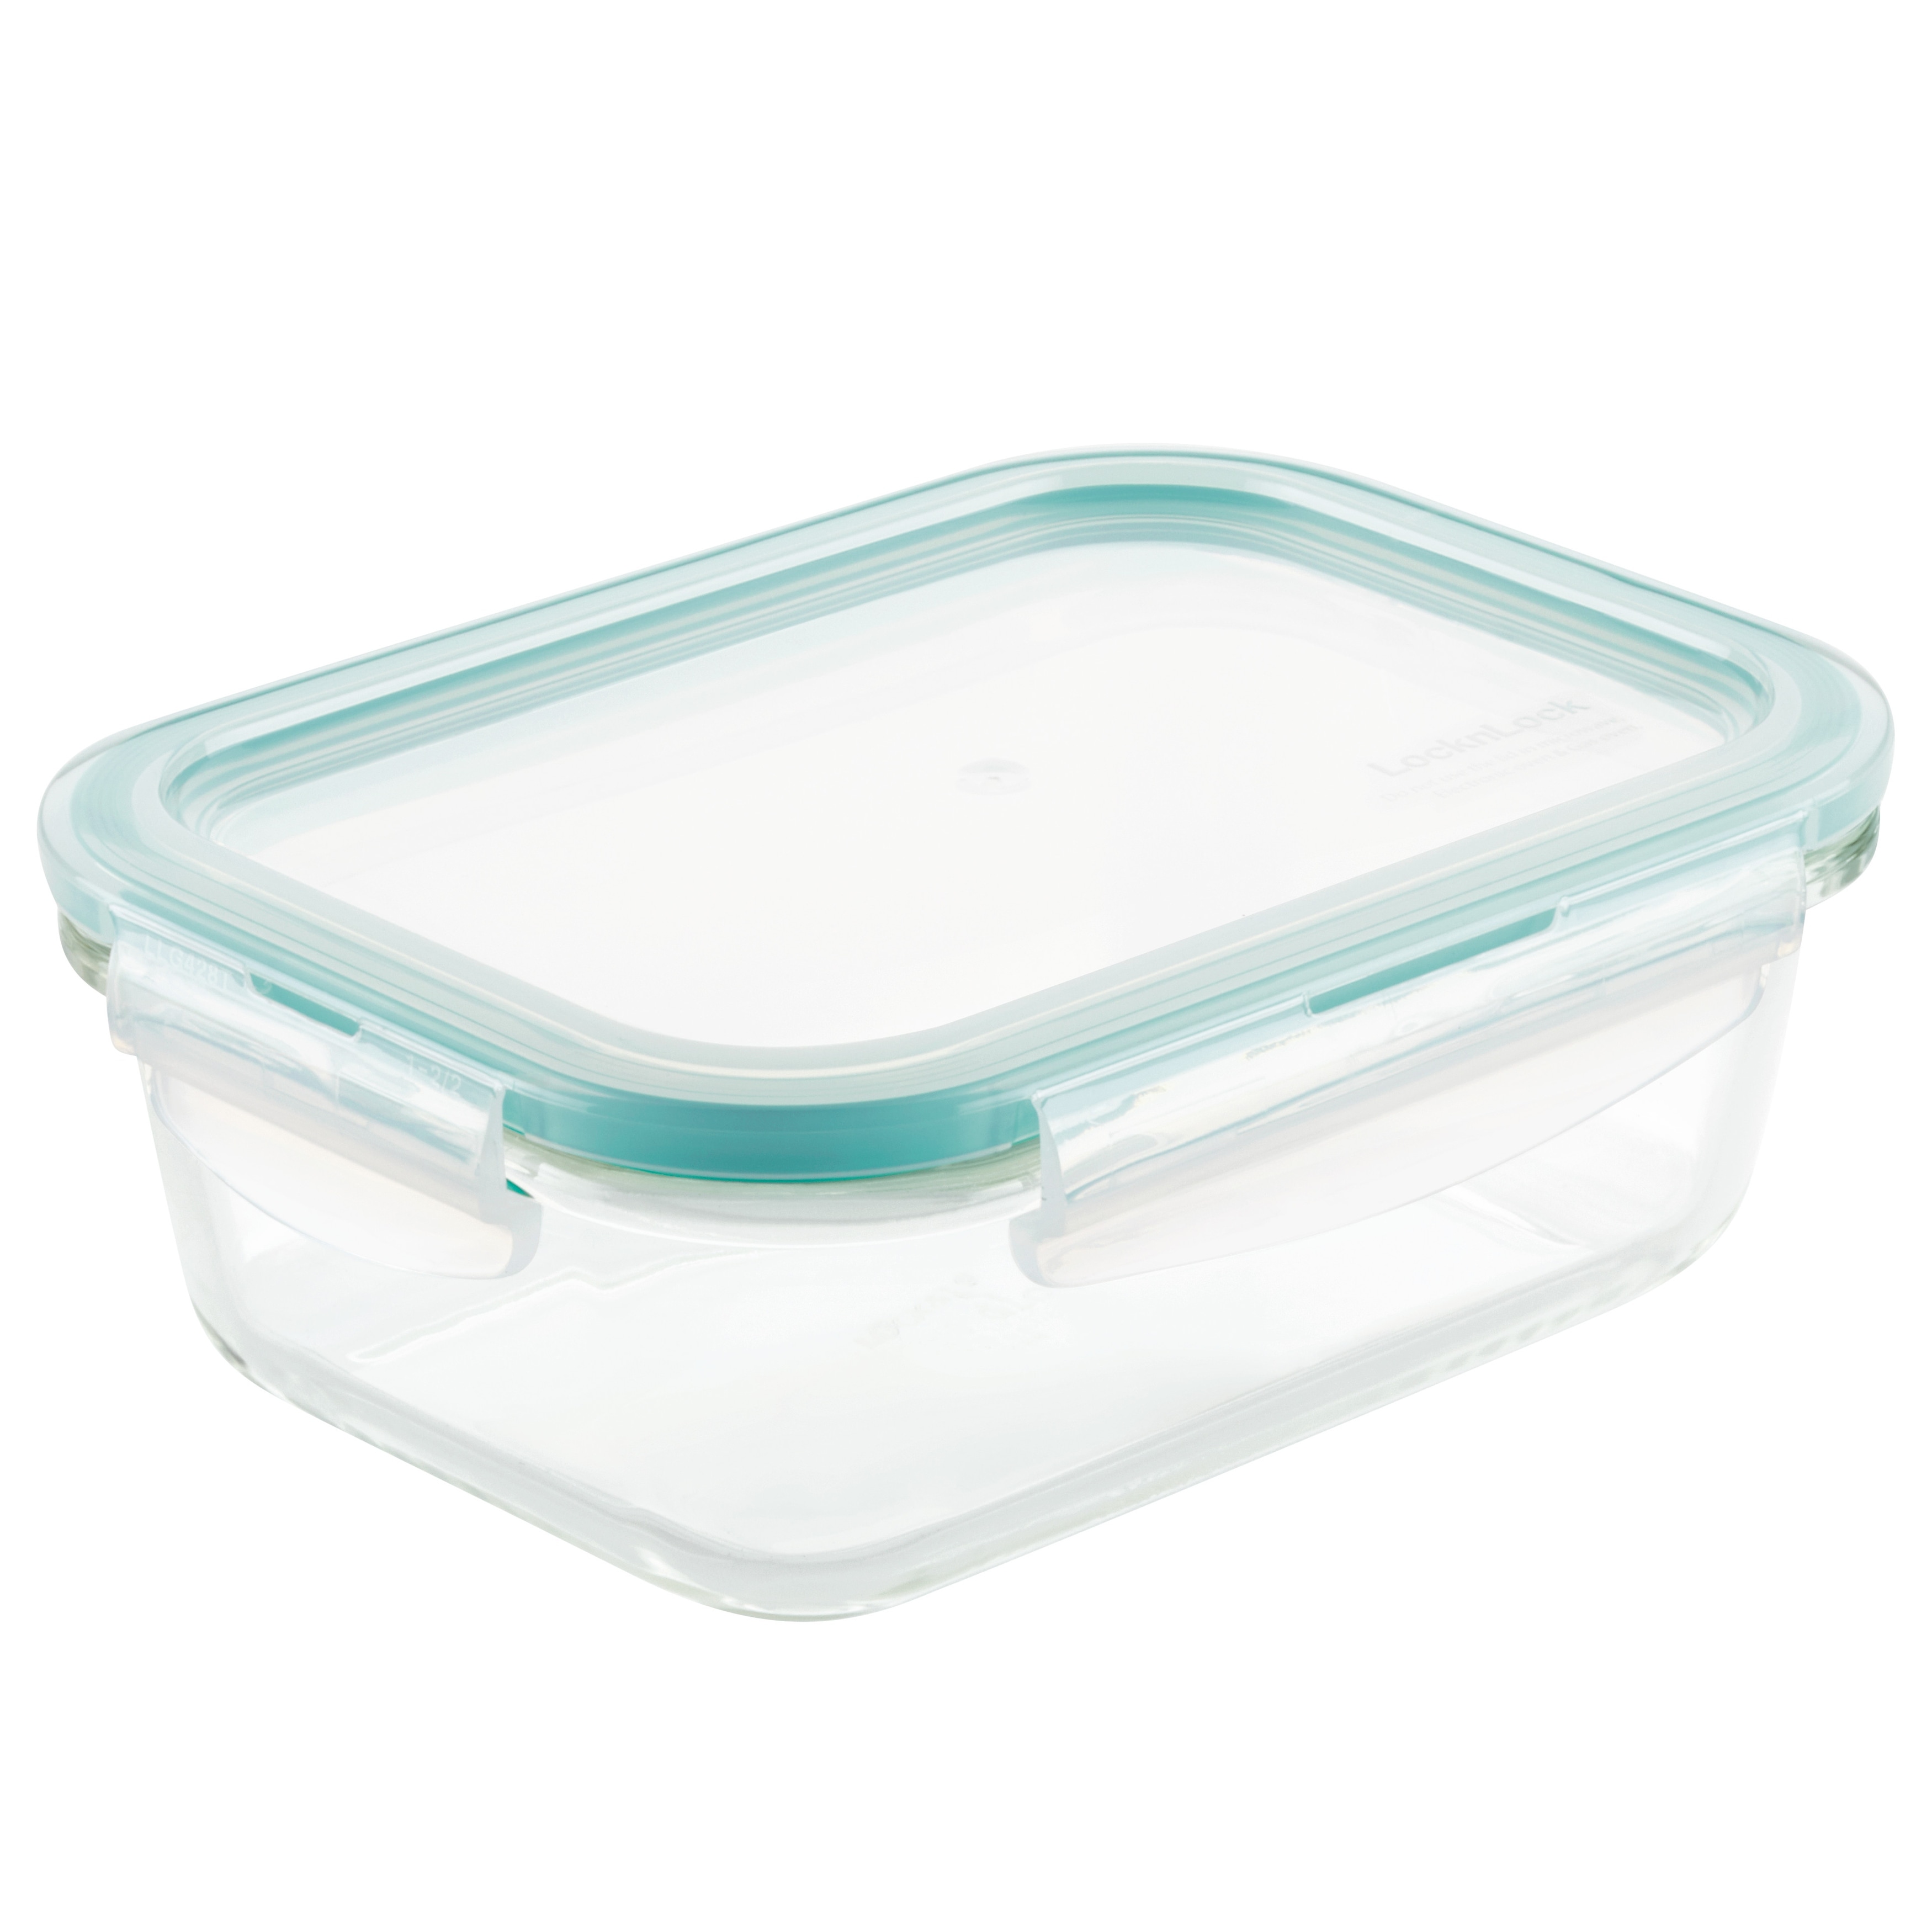 https://ak1.ostkcdn.com/images/products/is/images/direct/b7b4012c674cad48a51468f14147347cbbd3b280/LocknLock-Purely-Better-Glass-Rectangular-Food-Storage-Containers%2C-21-Ounce%2C-Set-of-Four.jpg